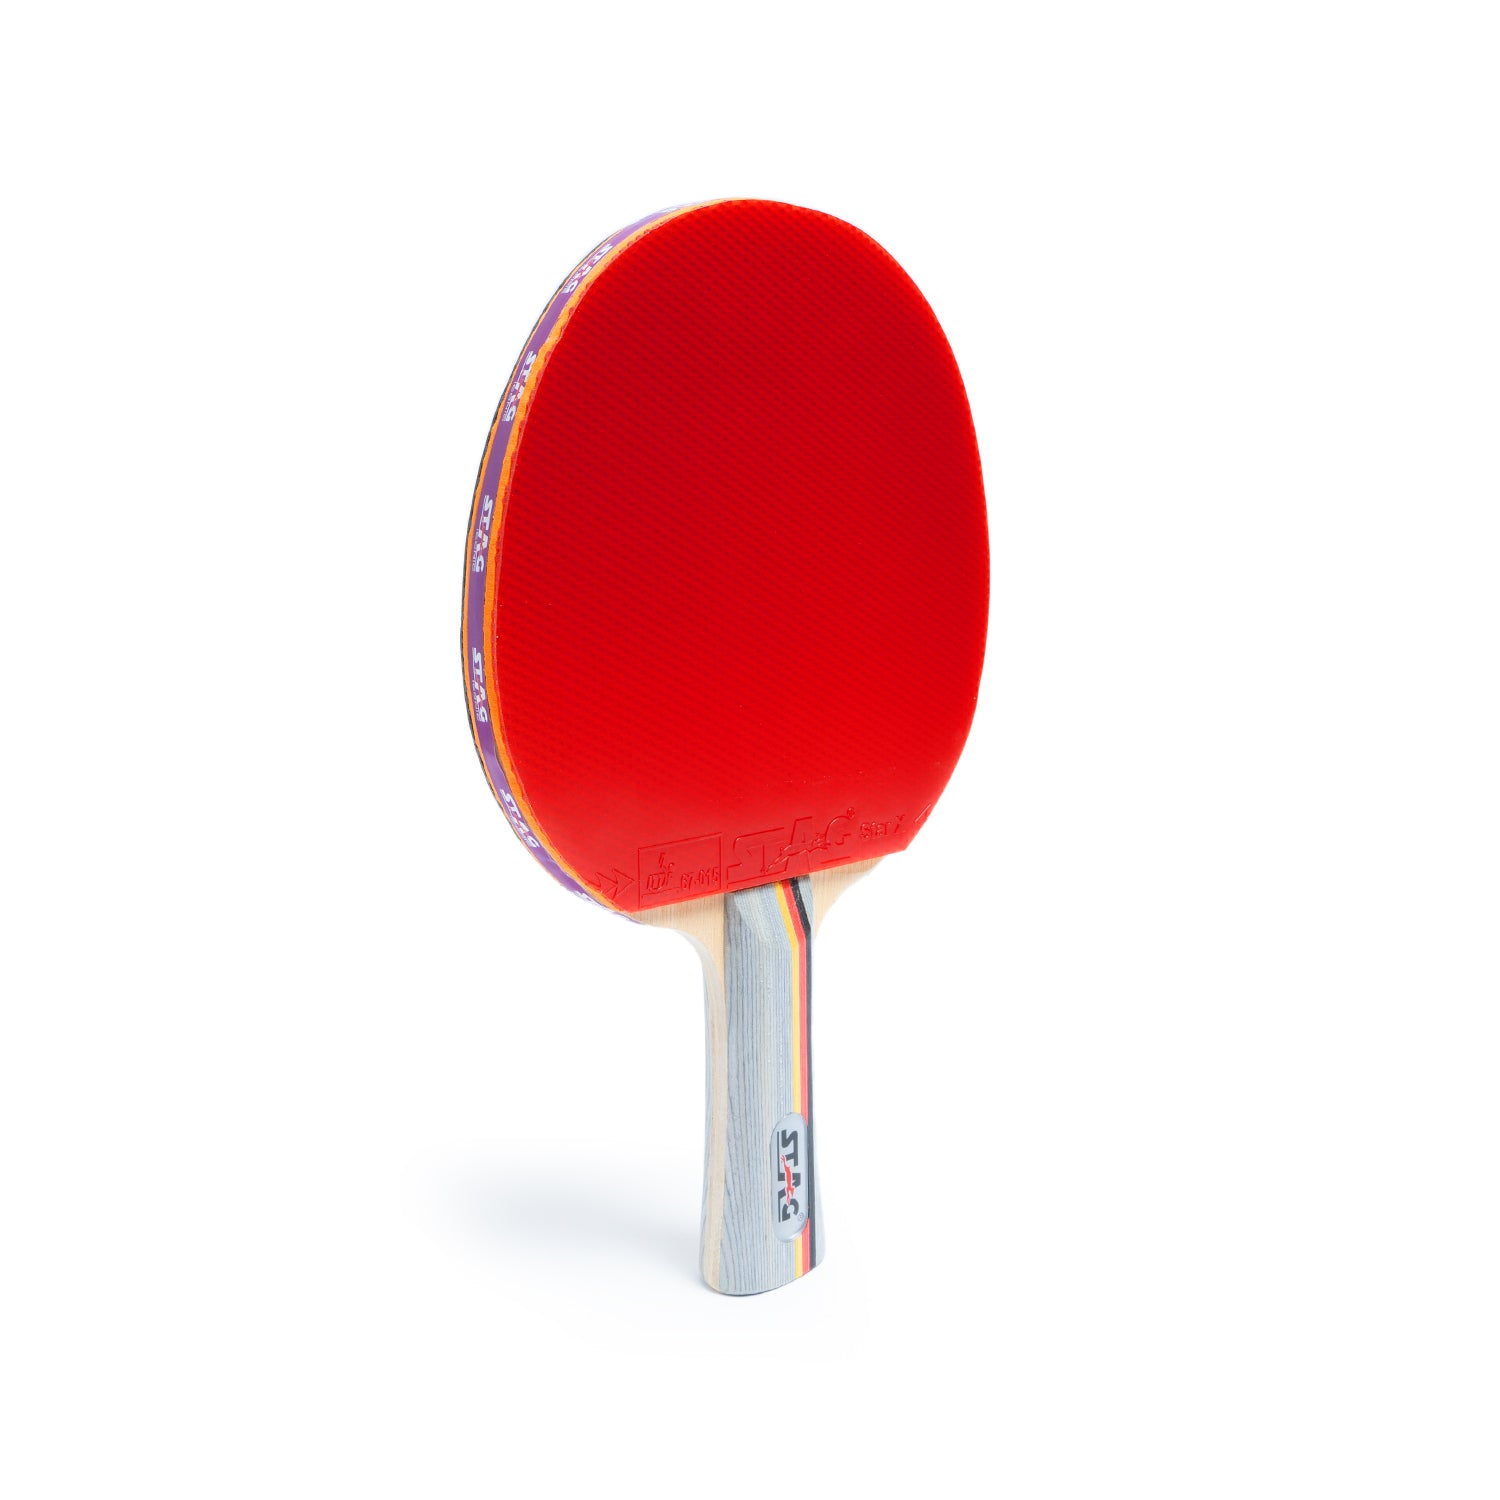 Stag 4 Star Table Tennis Racquet